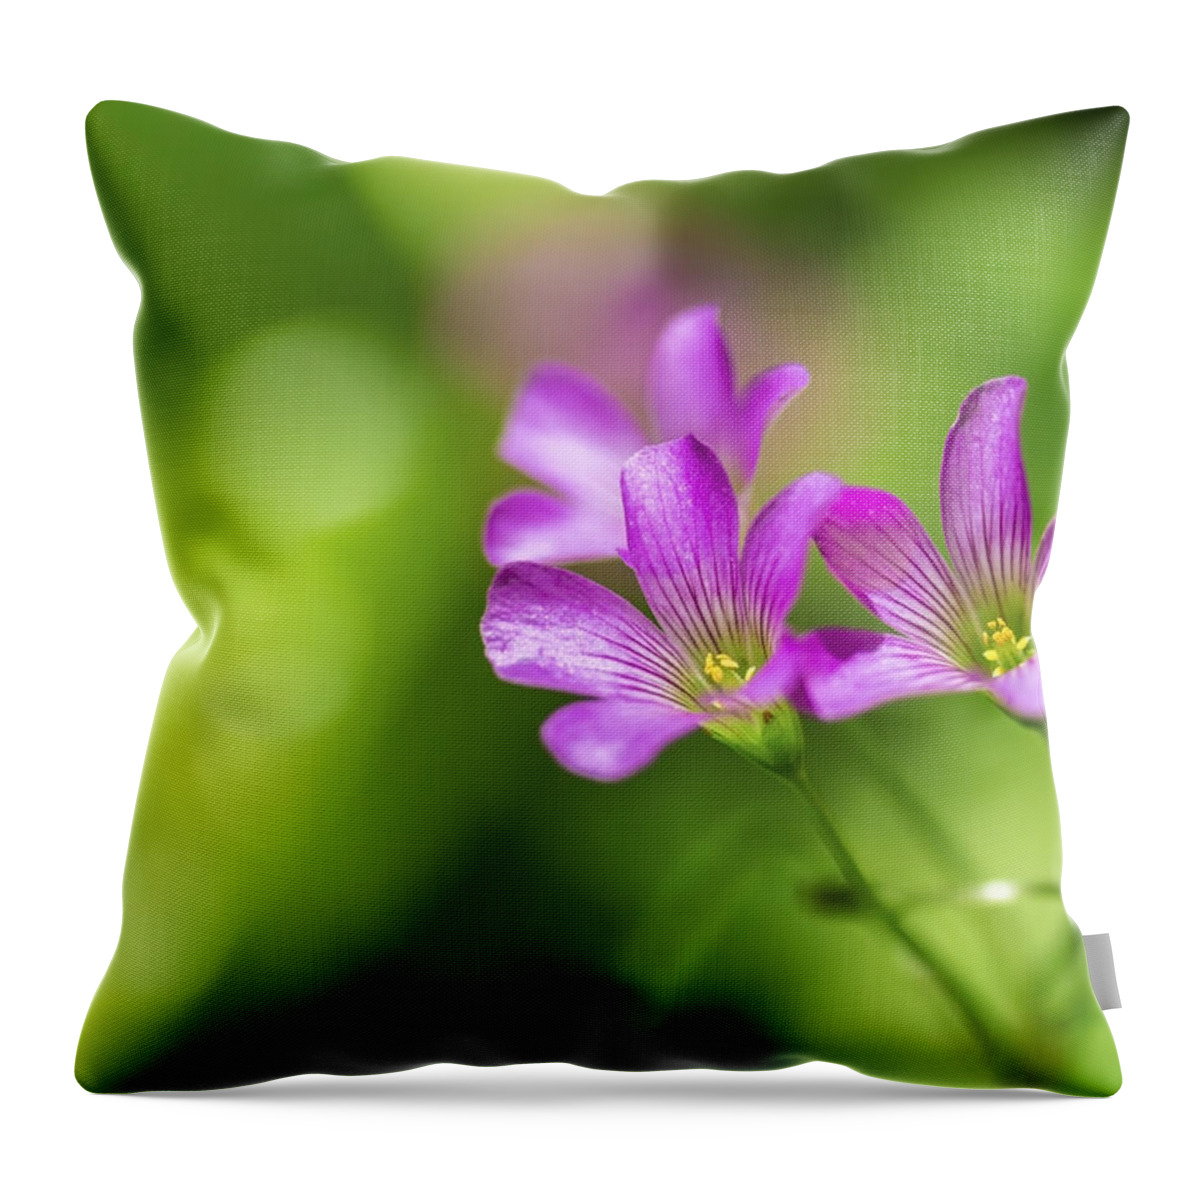 Hawaii Throw Pillow featuring the photograph Delicate Purple Wildflowers by Leigh Anne Meeks